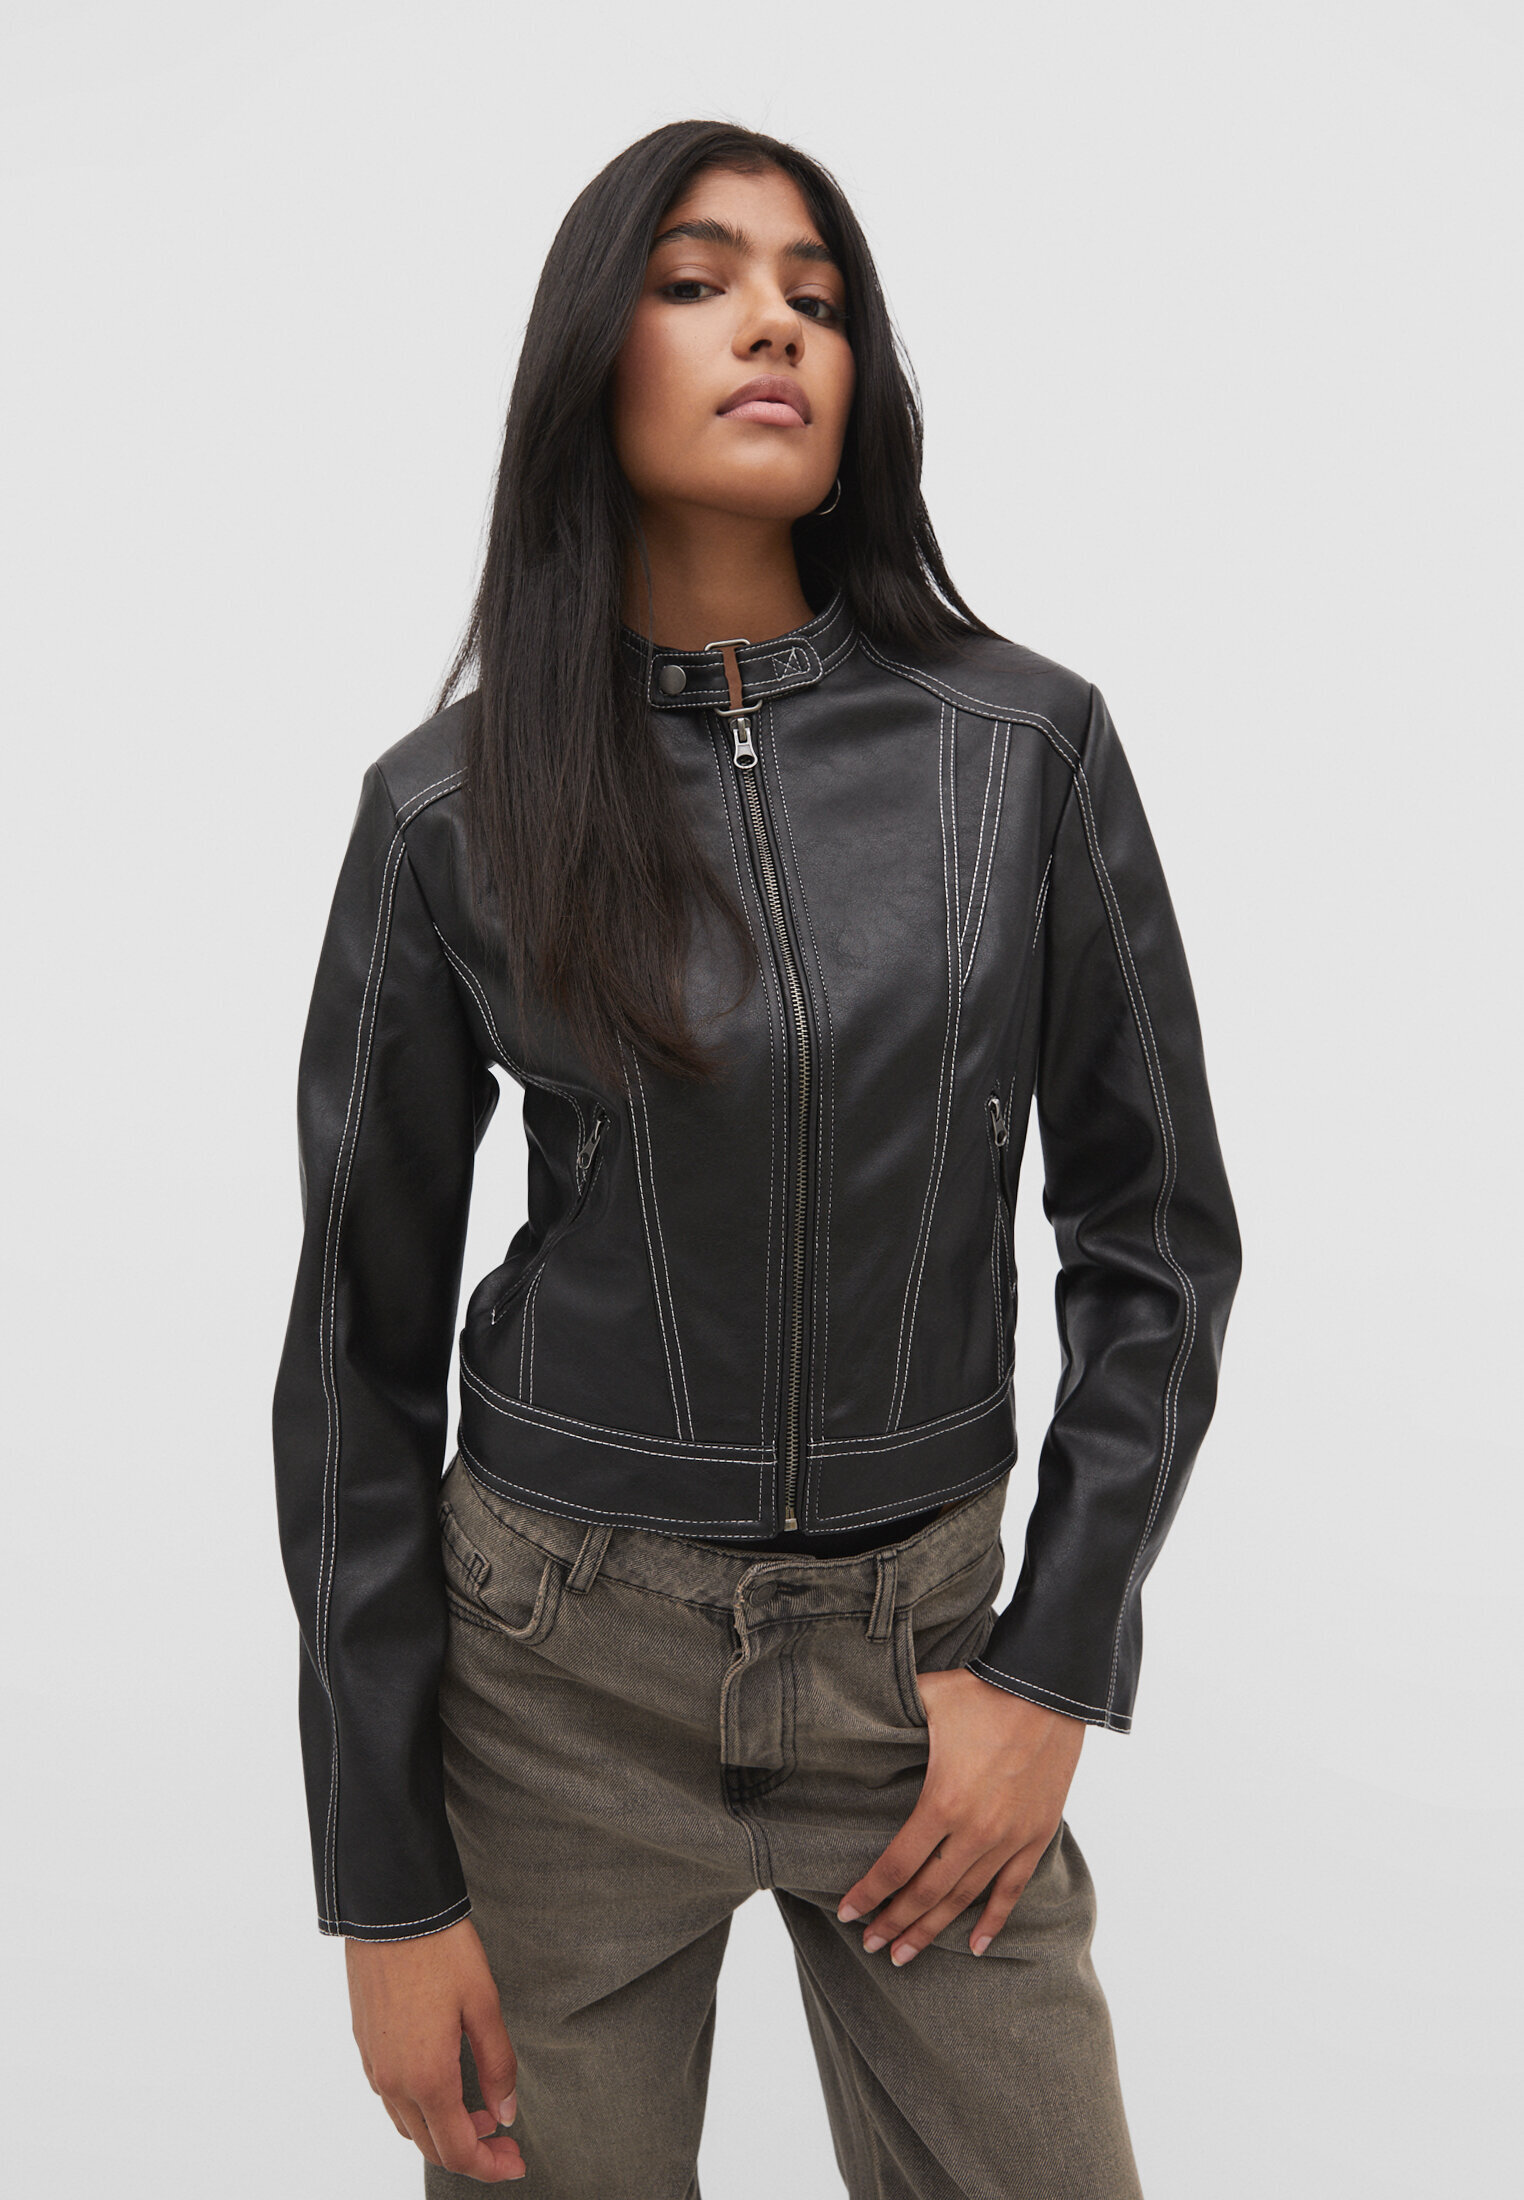 Faux leather jacket with contrast topstitching